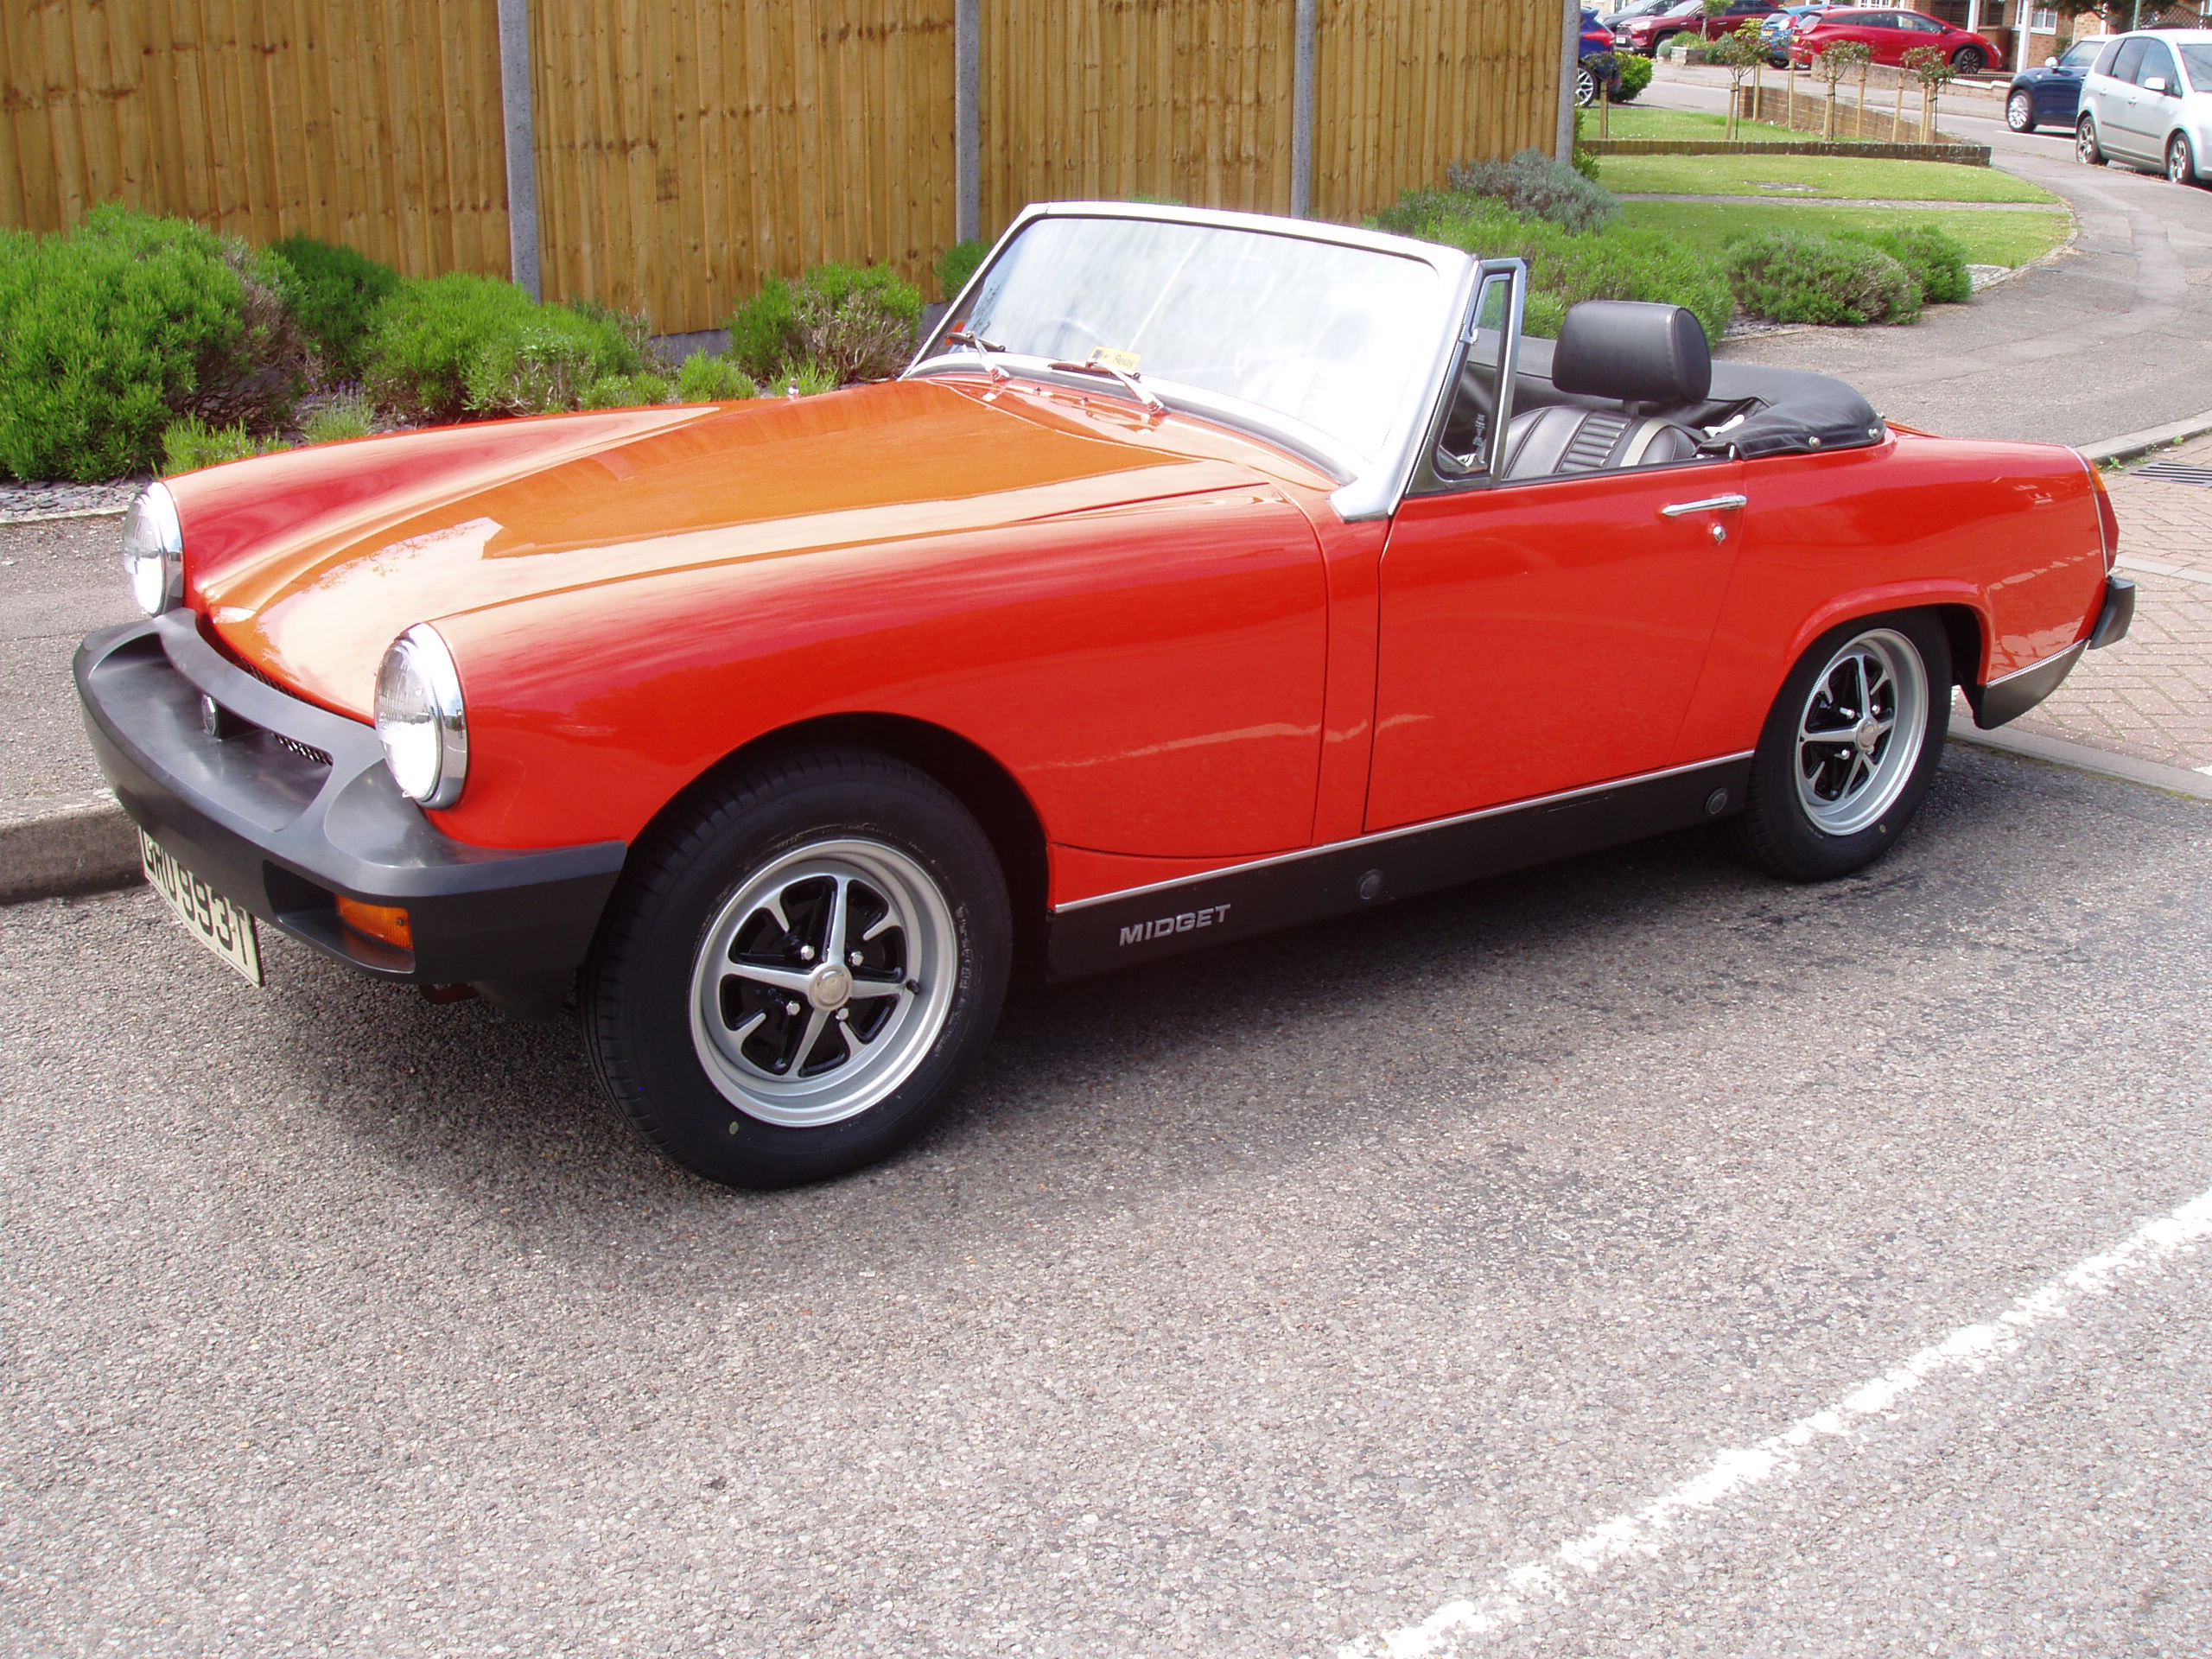 MG Midget - My First Classic - Page 10 - Readers' Cars - PistonHeads UK